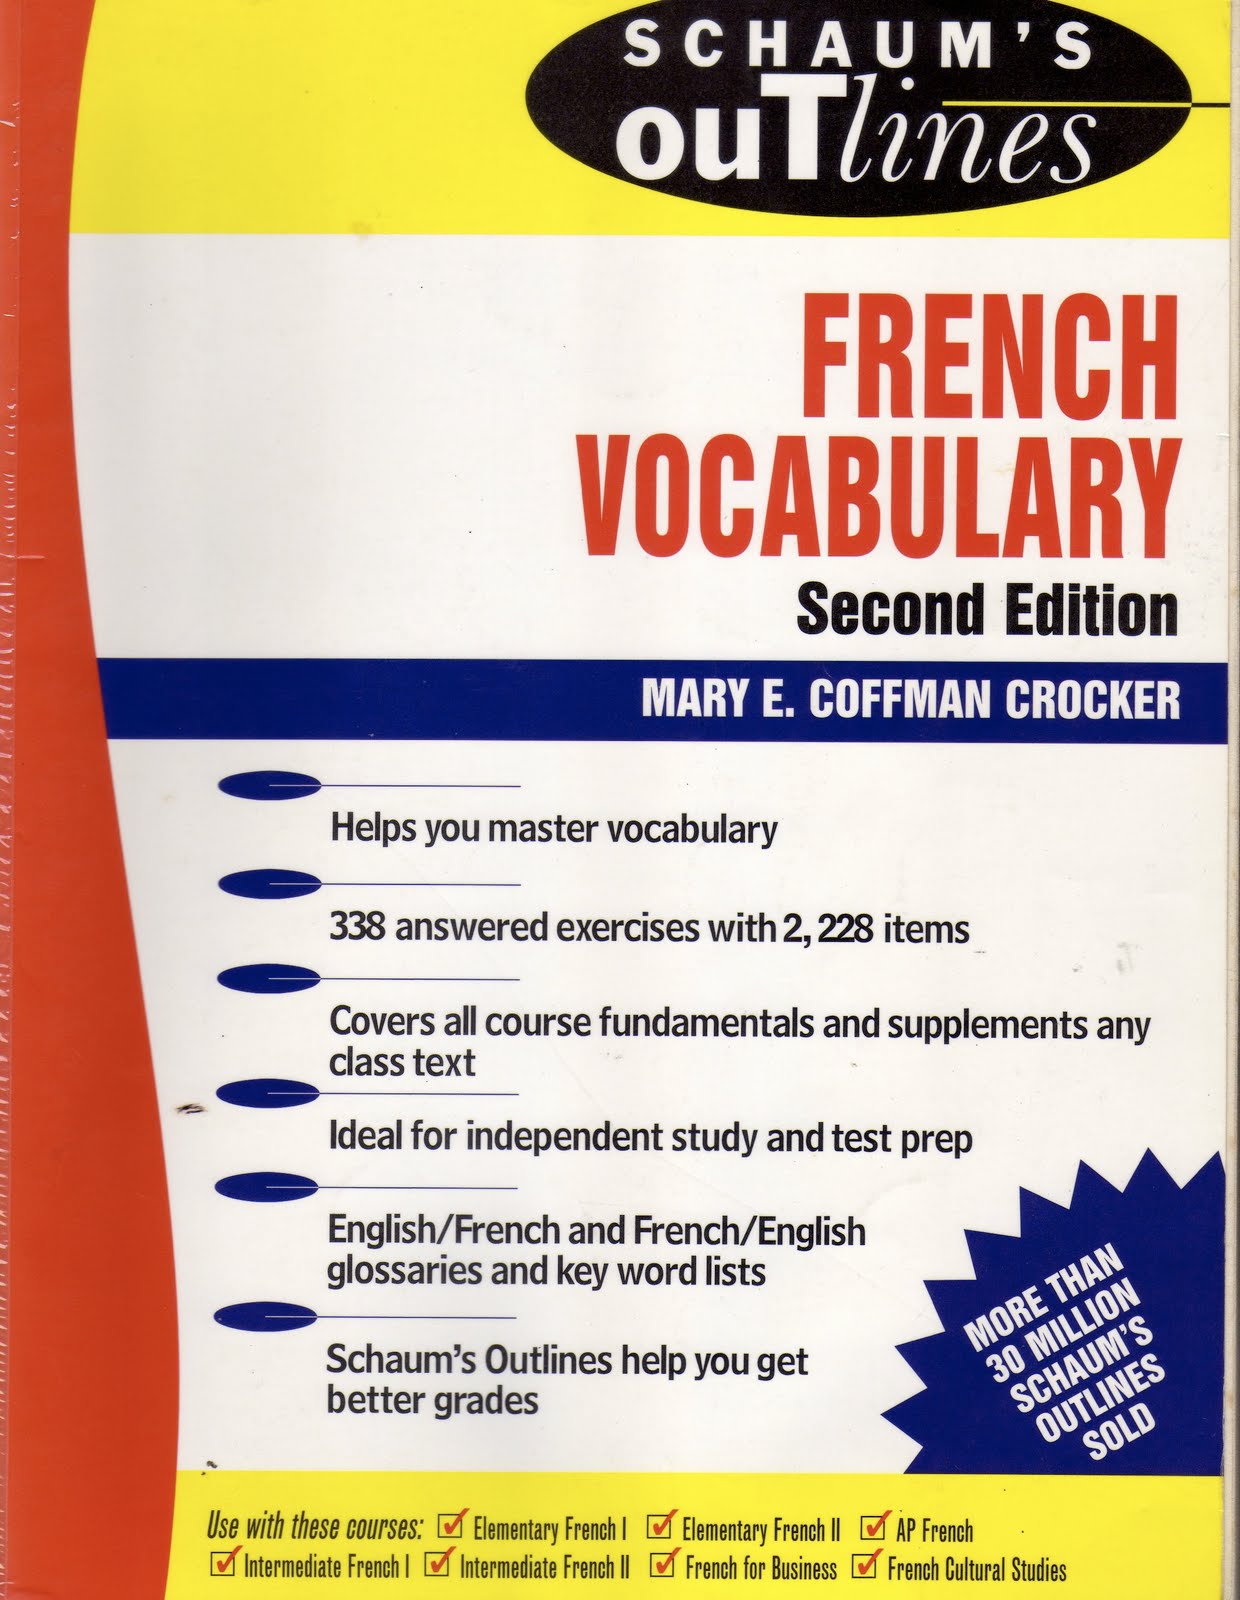 MCGRAW-Hill's conversational American English second Edition. English and French languages.